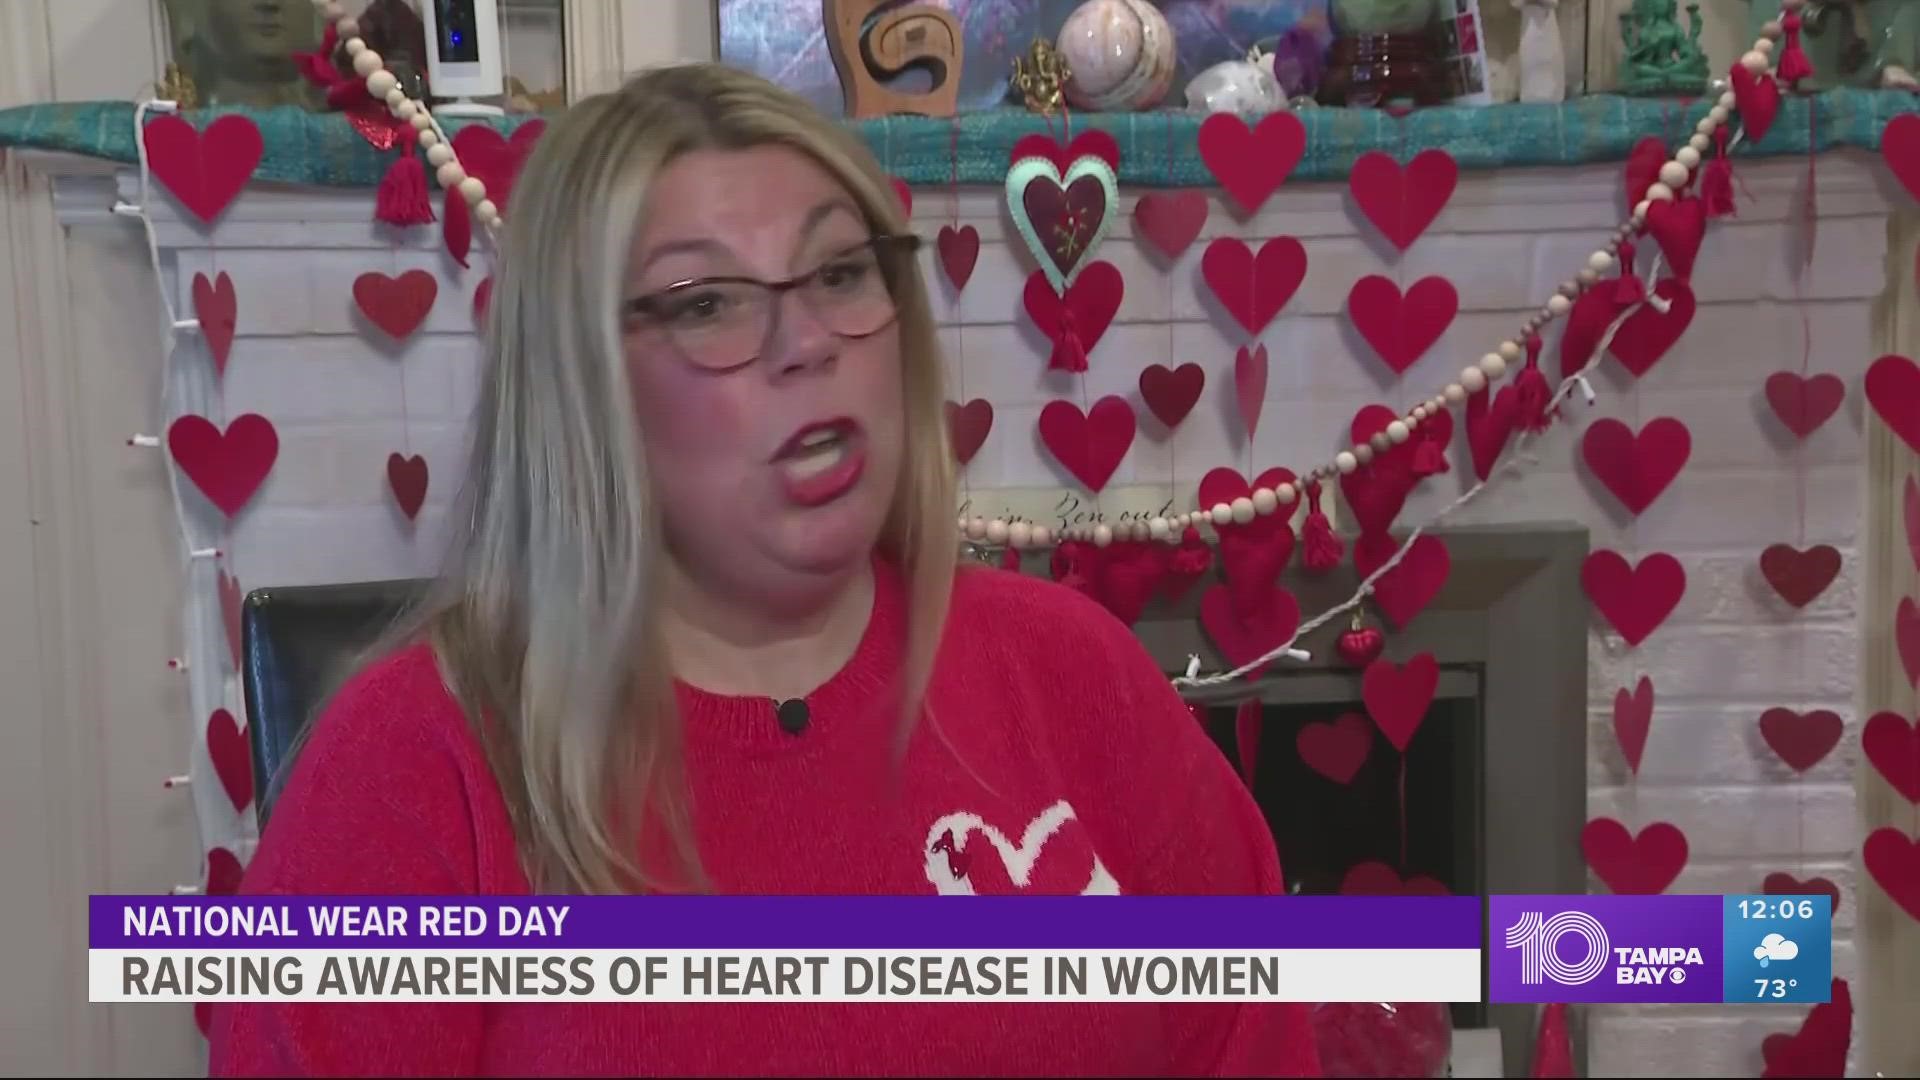 Cardiovascular disease is the number 1 killer of women, causing 1 in 3 deaths each year